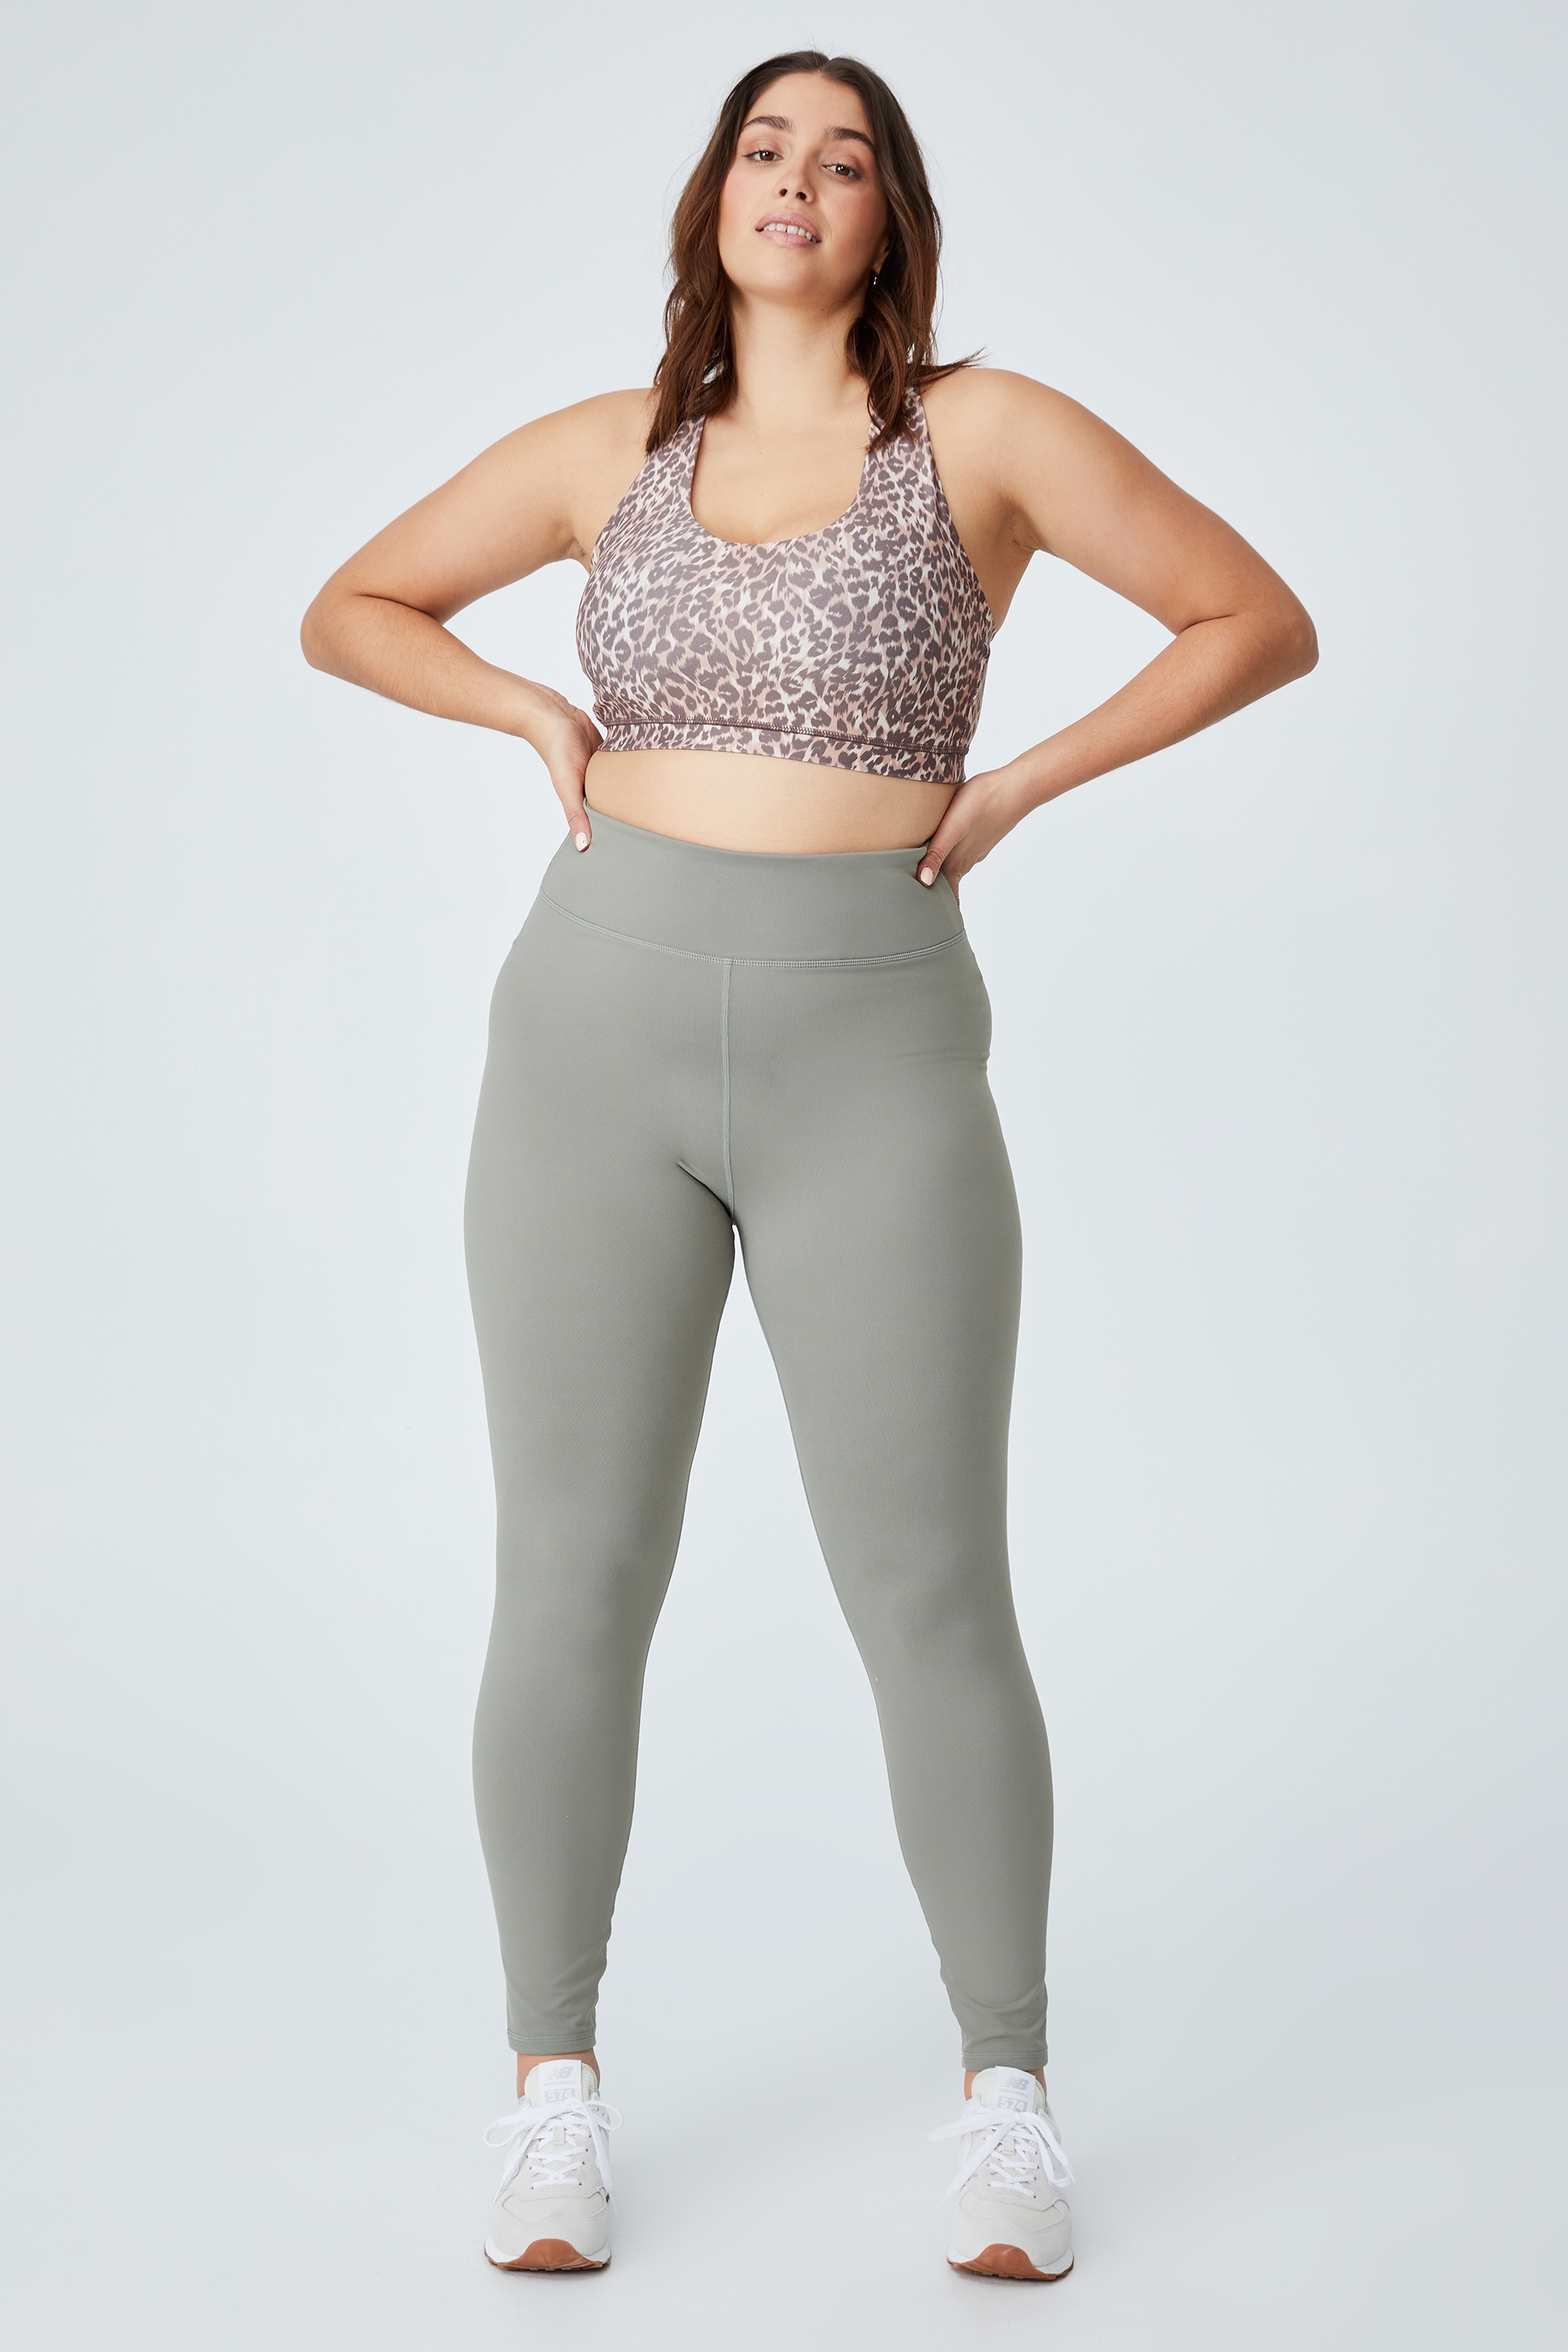 Cotton On Women - Curve Active Highwaist Core 7/8 Tight - Core steely shadow